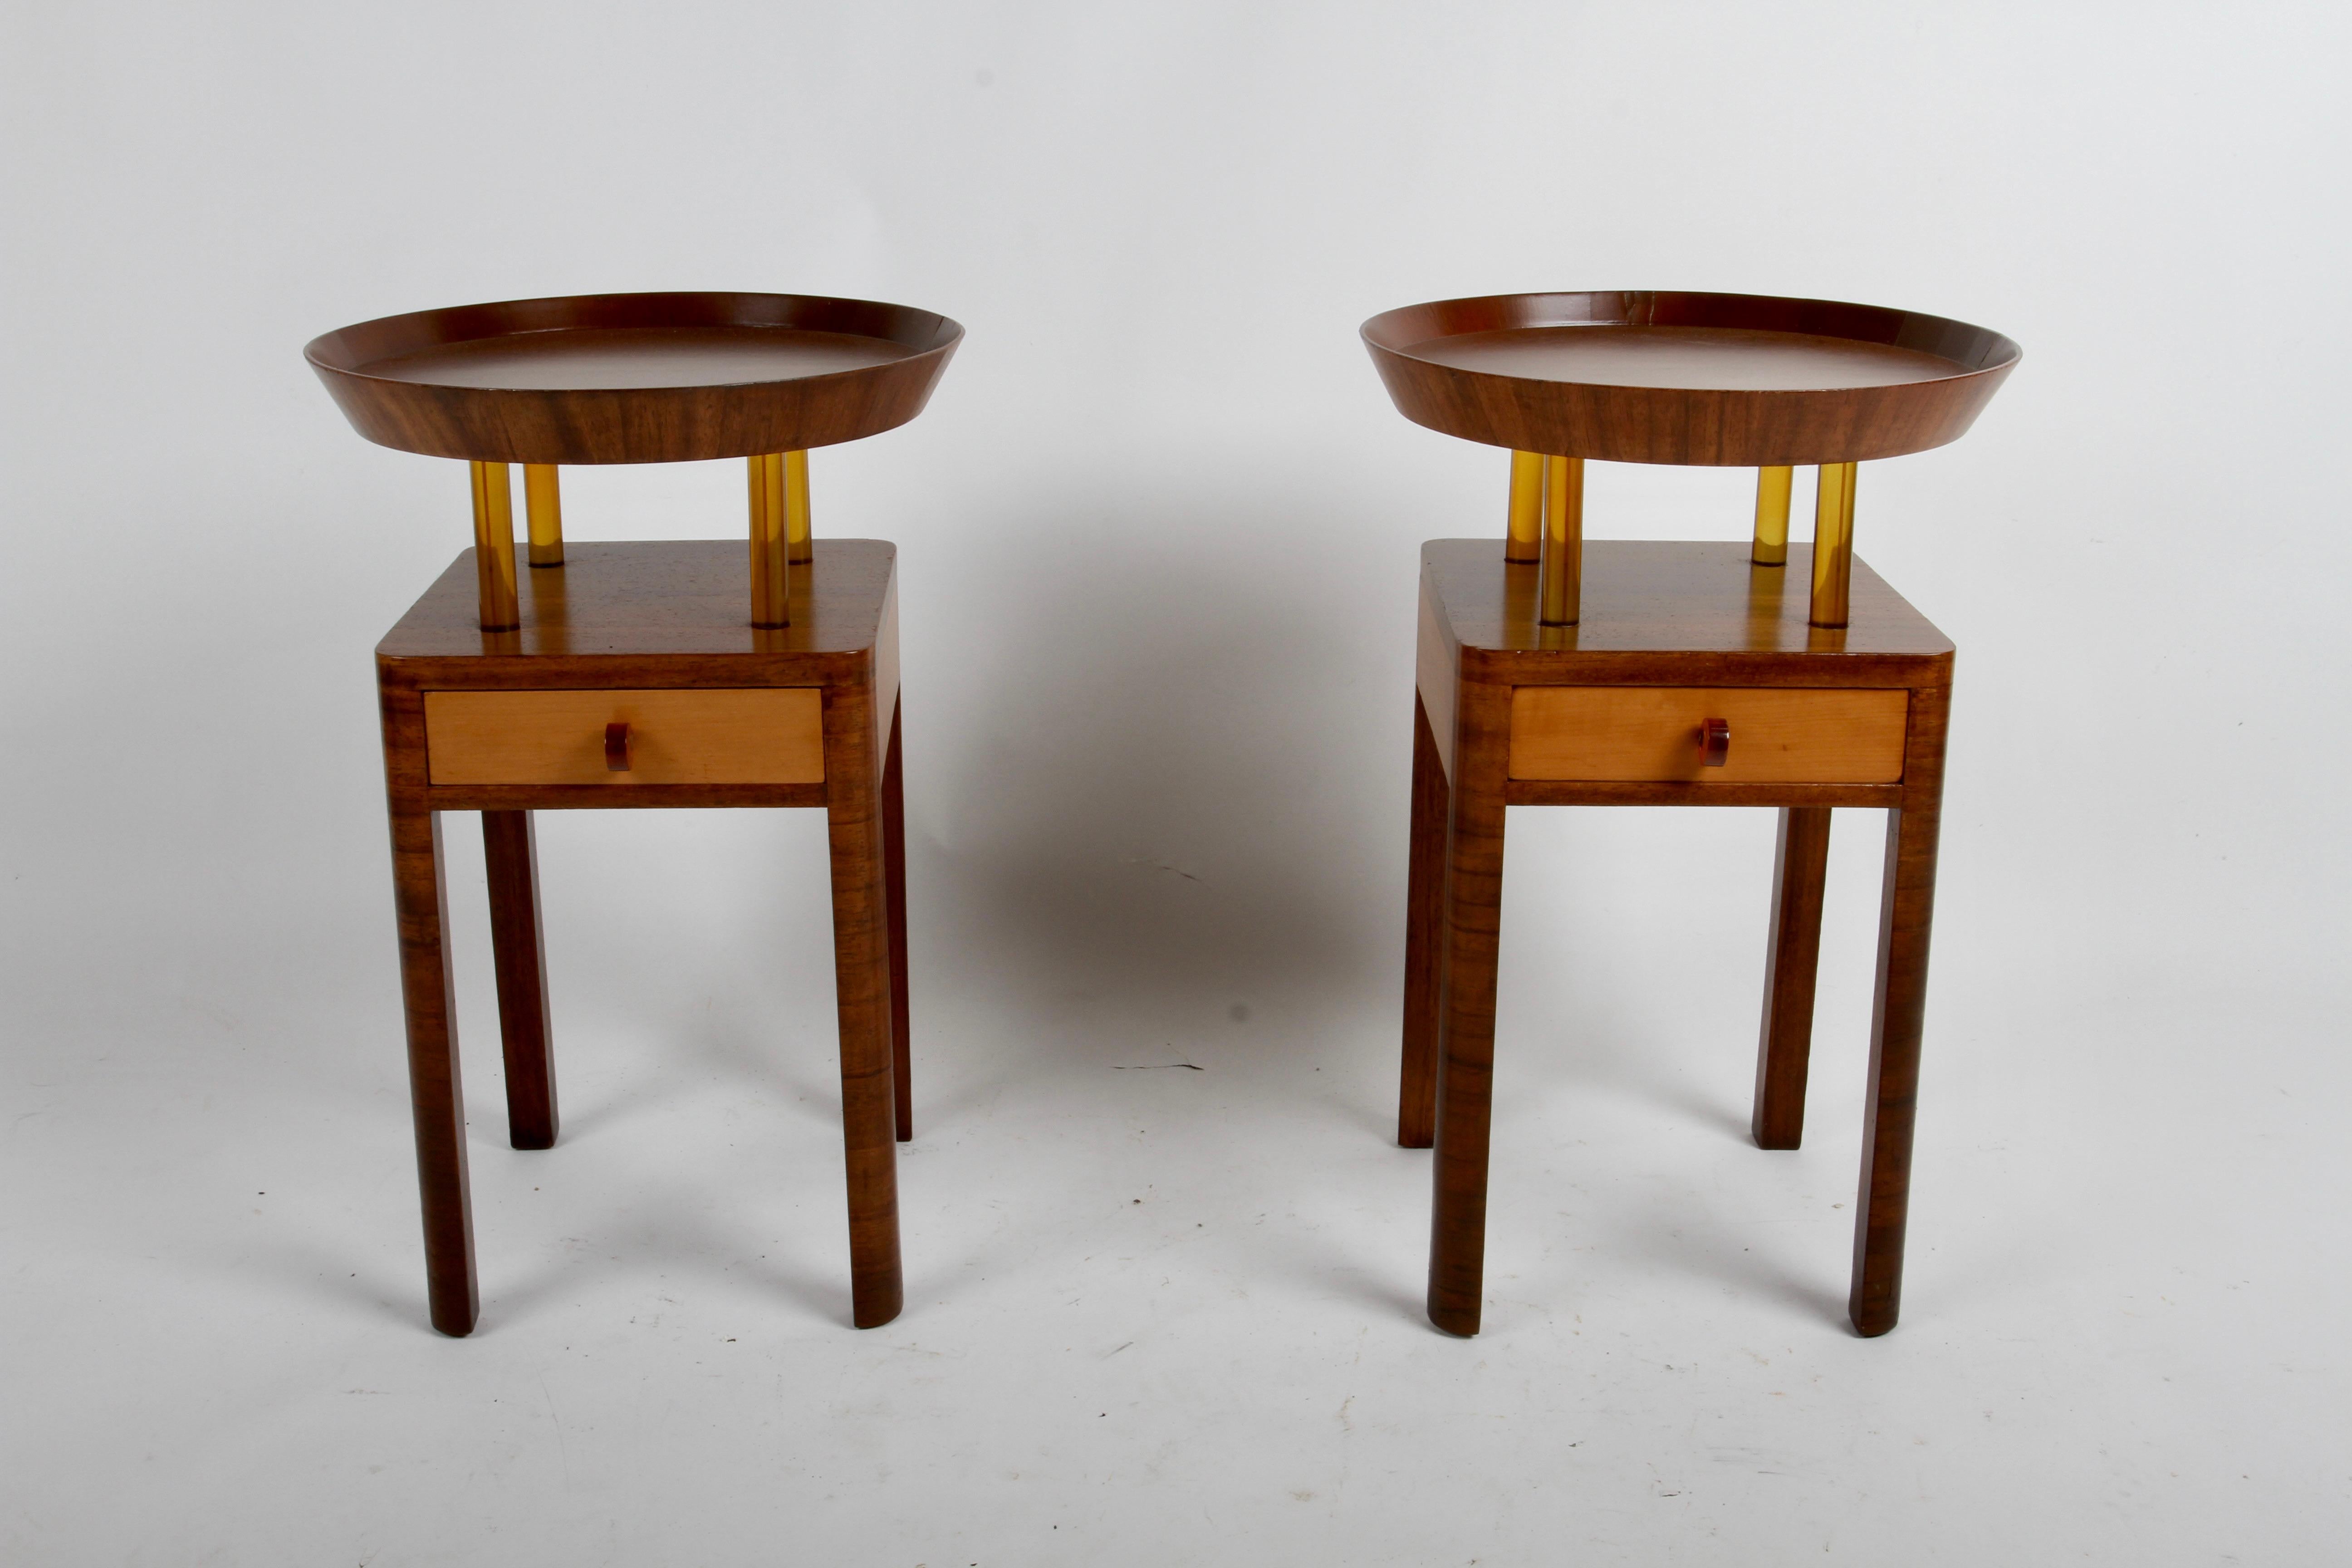 Rare Pair of 1940s Grosfeld House Round Tray Top End Table with Bakelite Details In Good Condition For Sale In St. Louis, MO